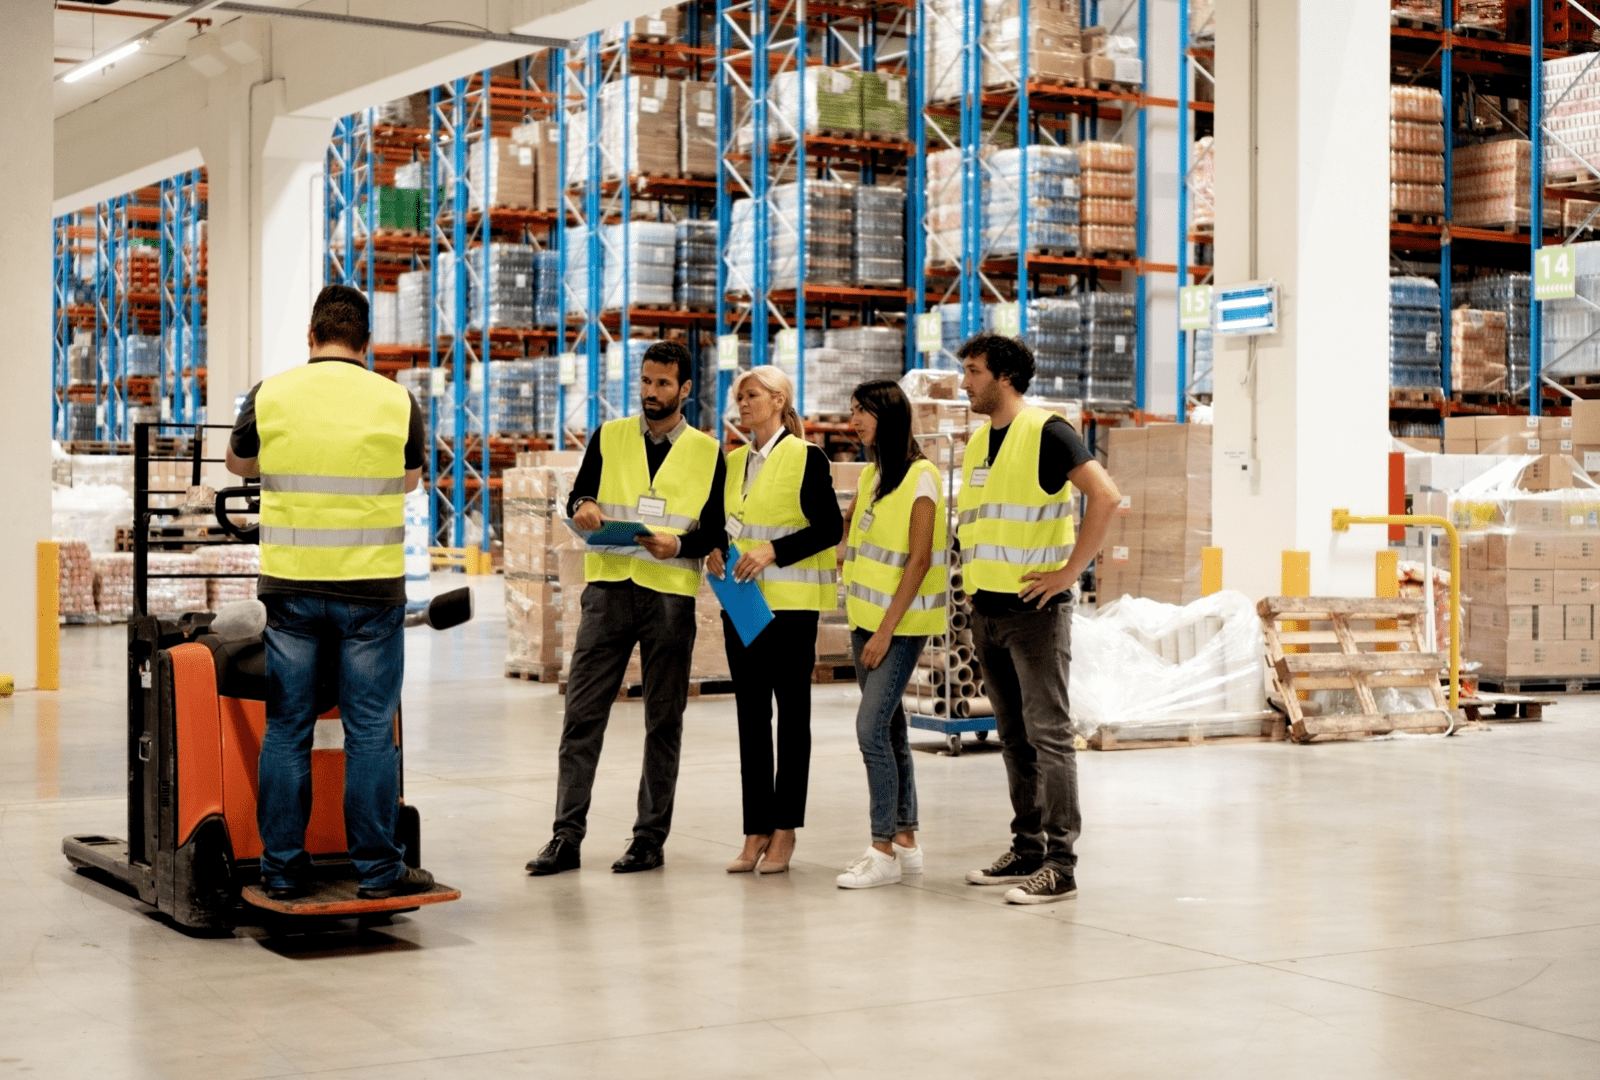 Employees Wearing Safety Vests Undergoing Forklift Training In Warehouse